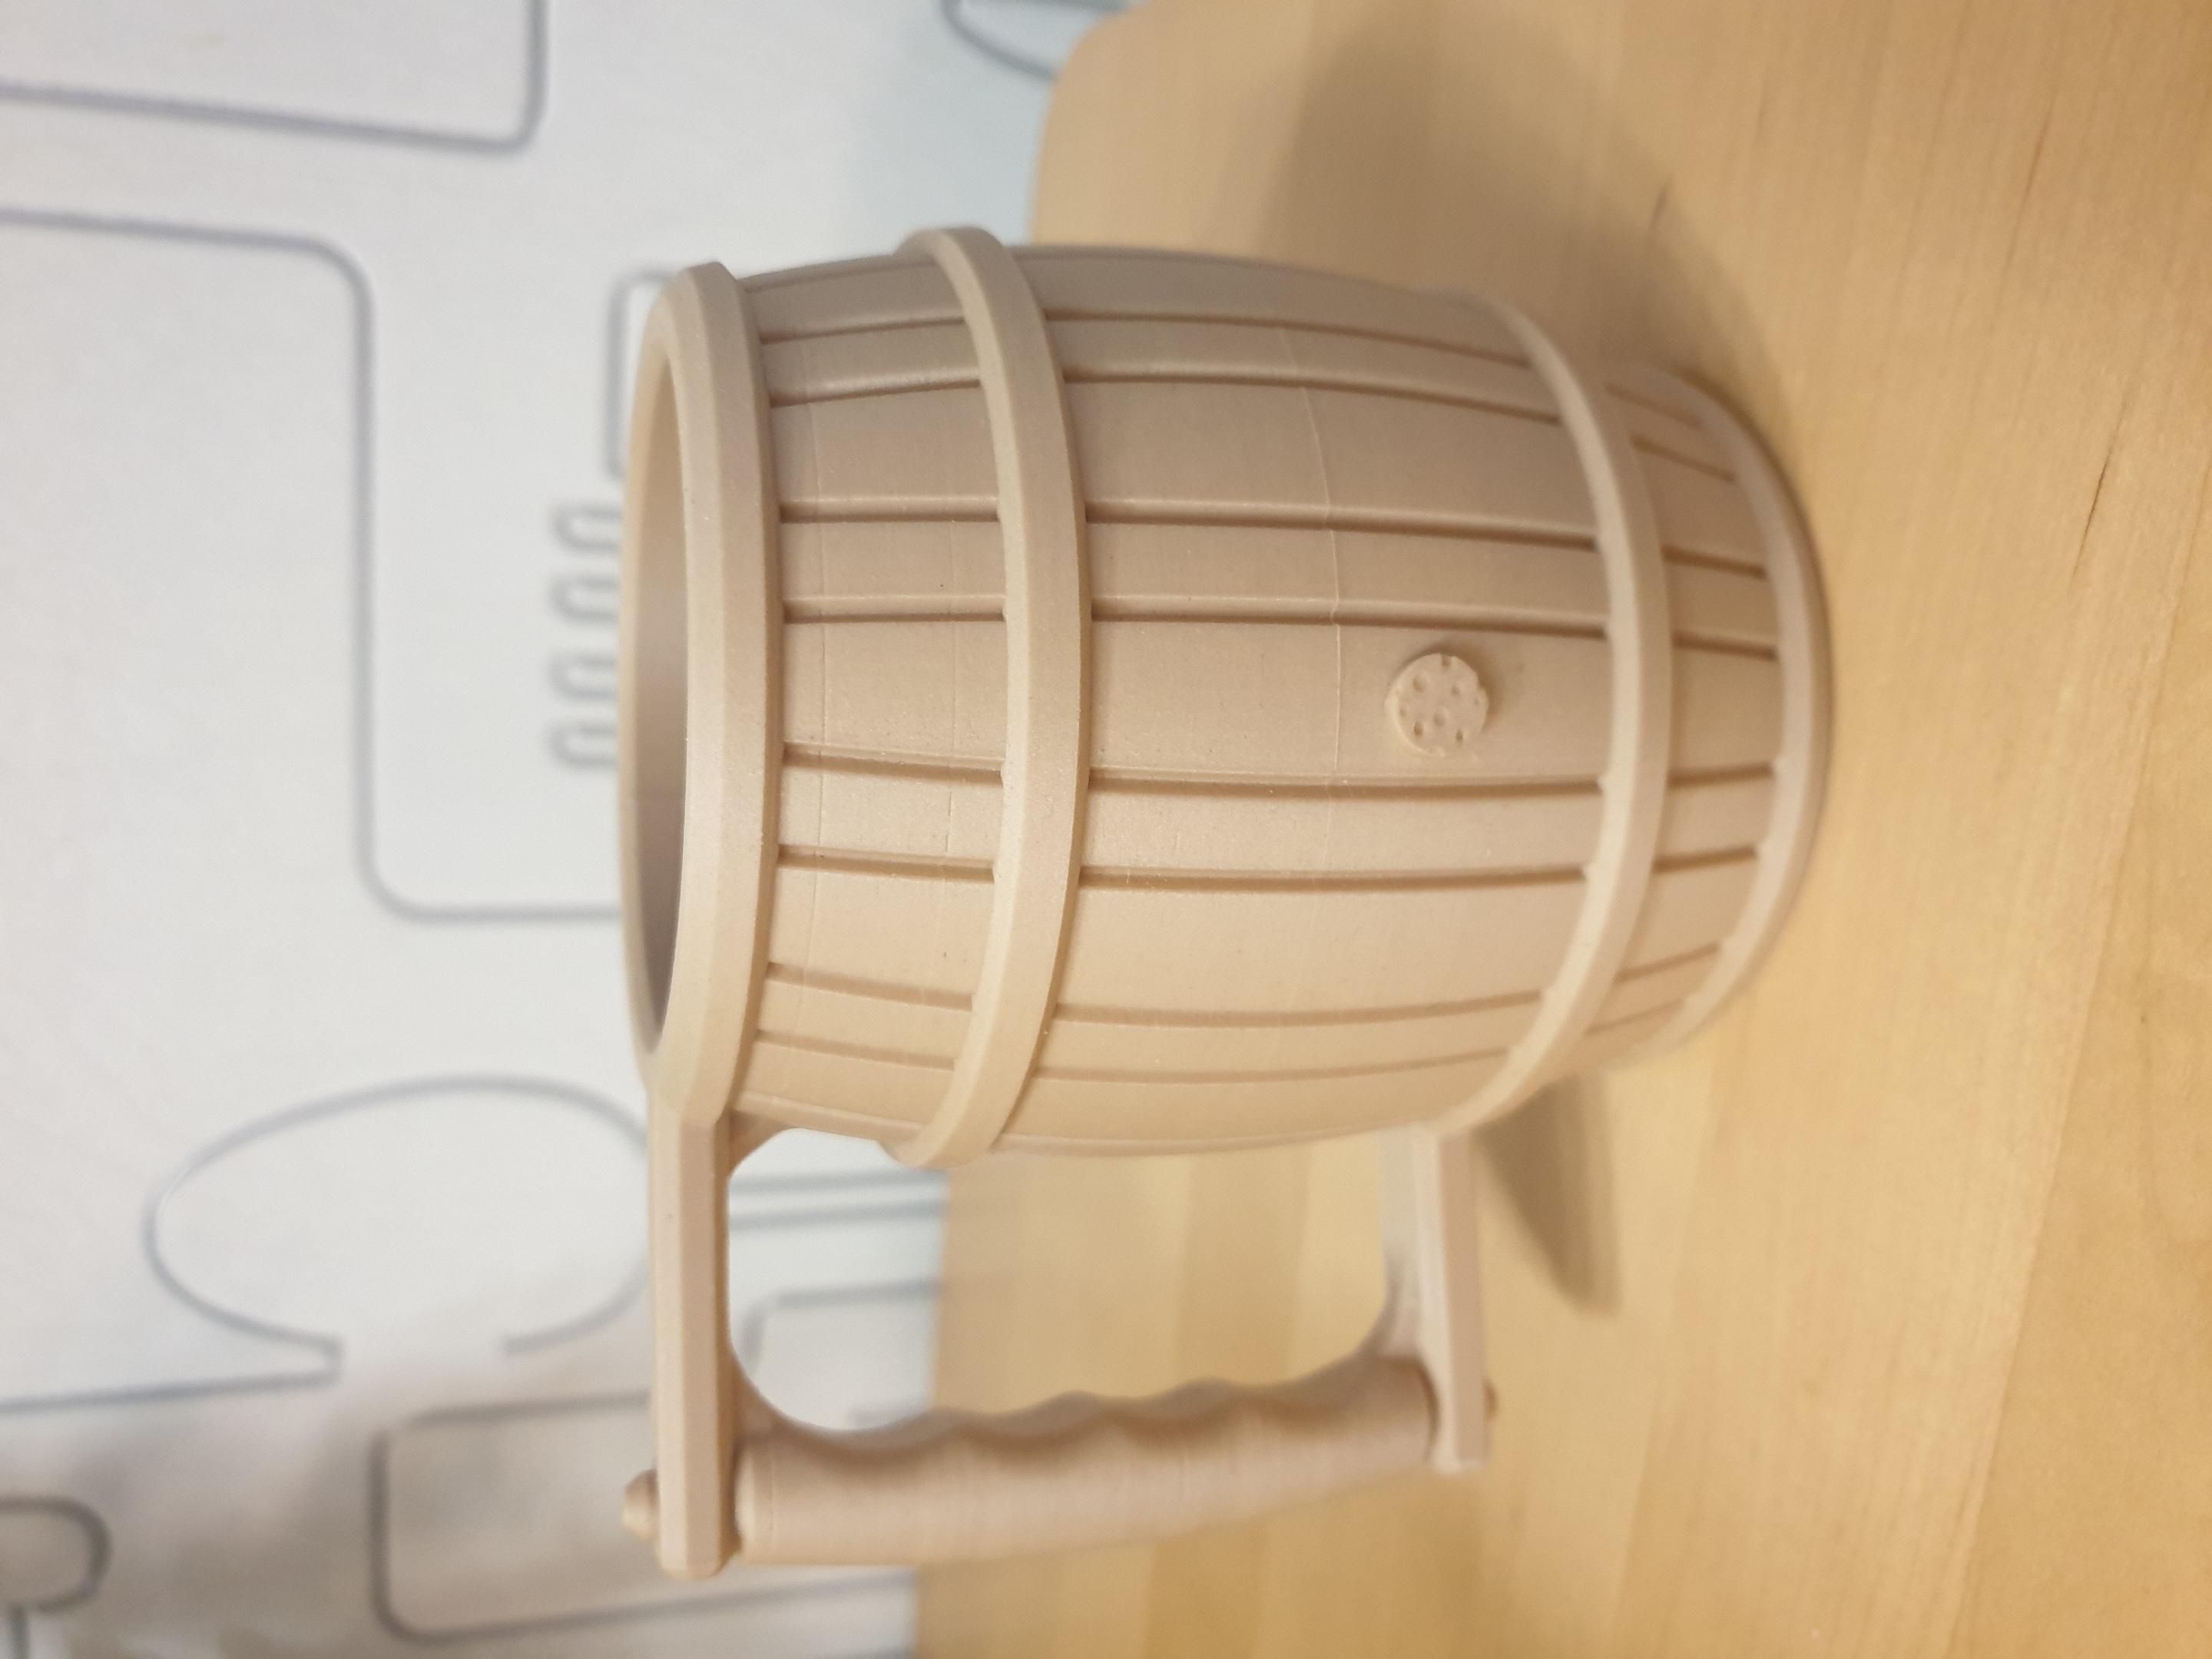 Root Beer Barrel - 12oz Can Coozie aka Stein for your Soda Pop Cans! - Printed with Sunlu low temp wood filament. - 3d model